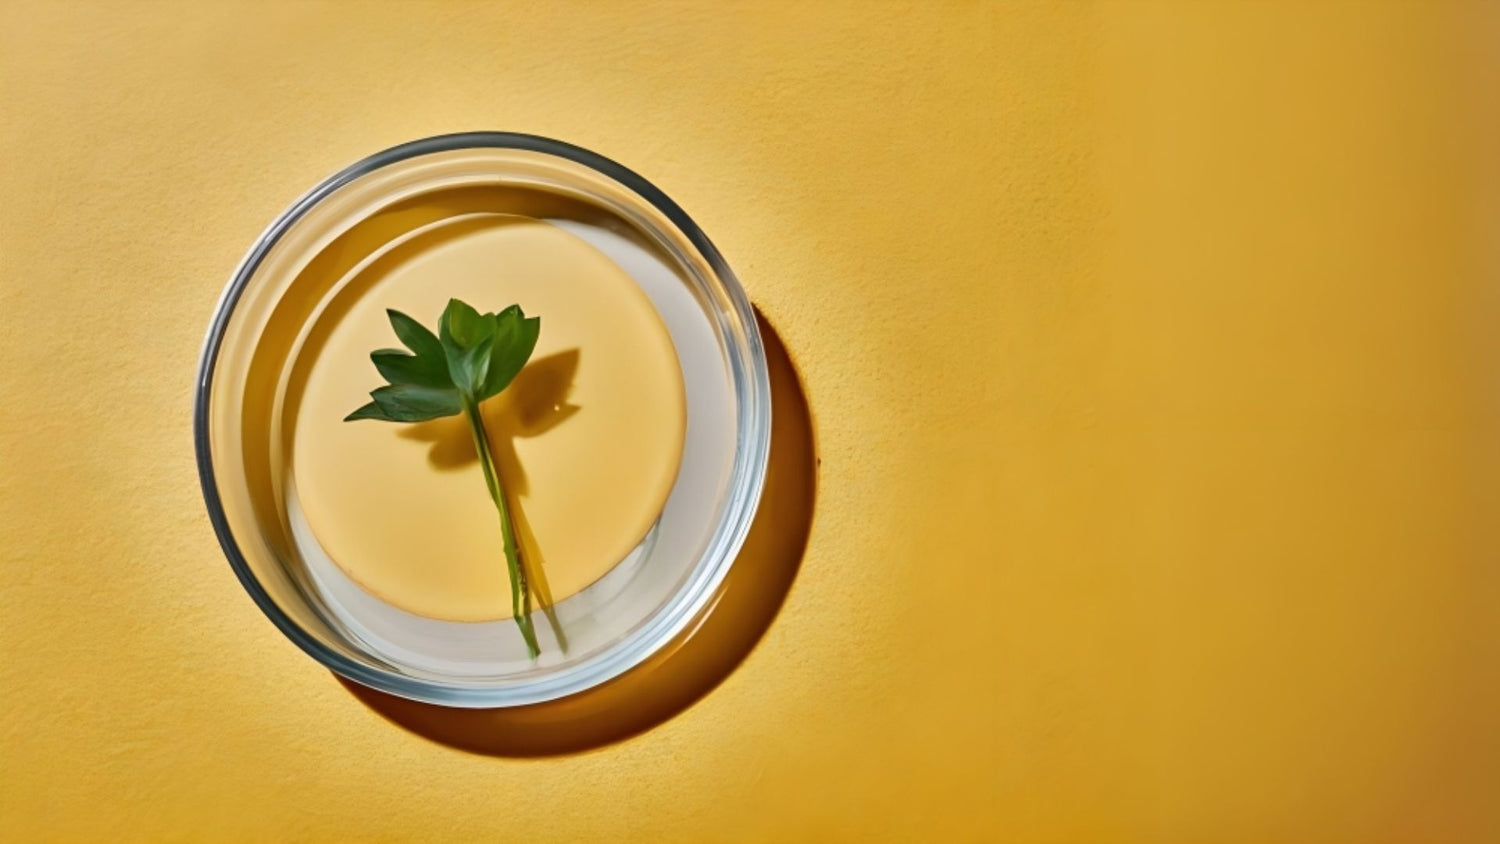 A transparent petri dish containing a natural herbal leaf, displayed against a yellow background